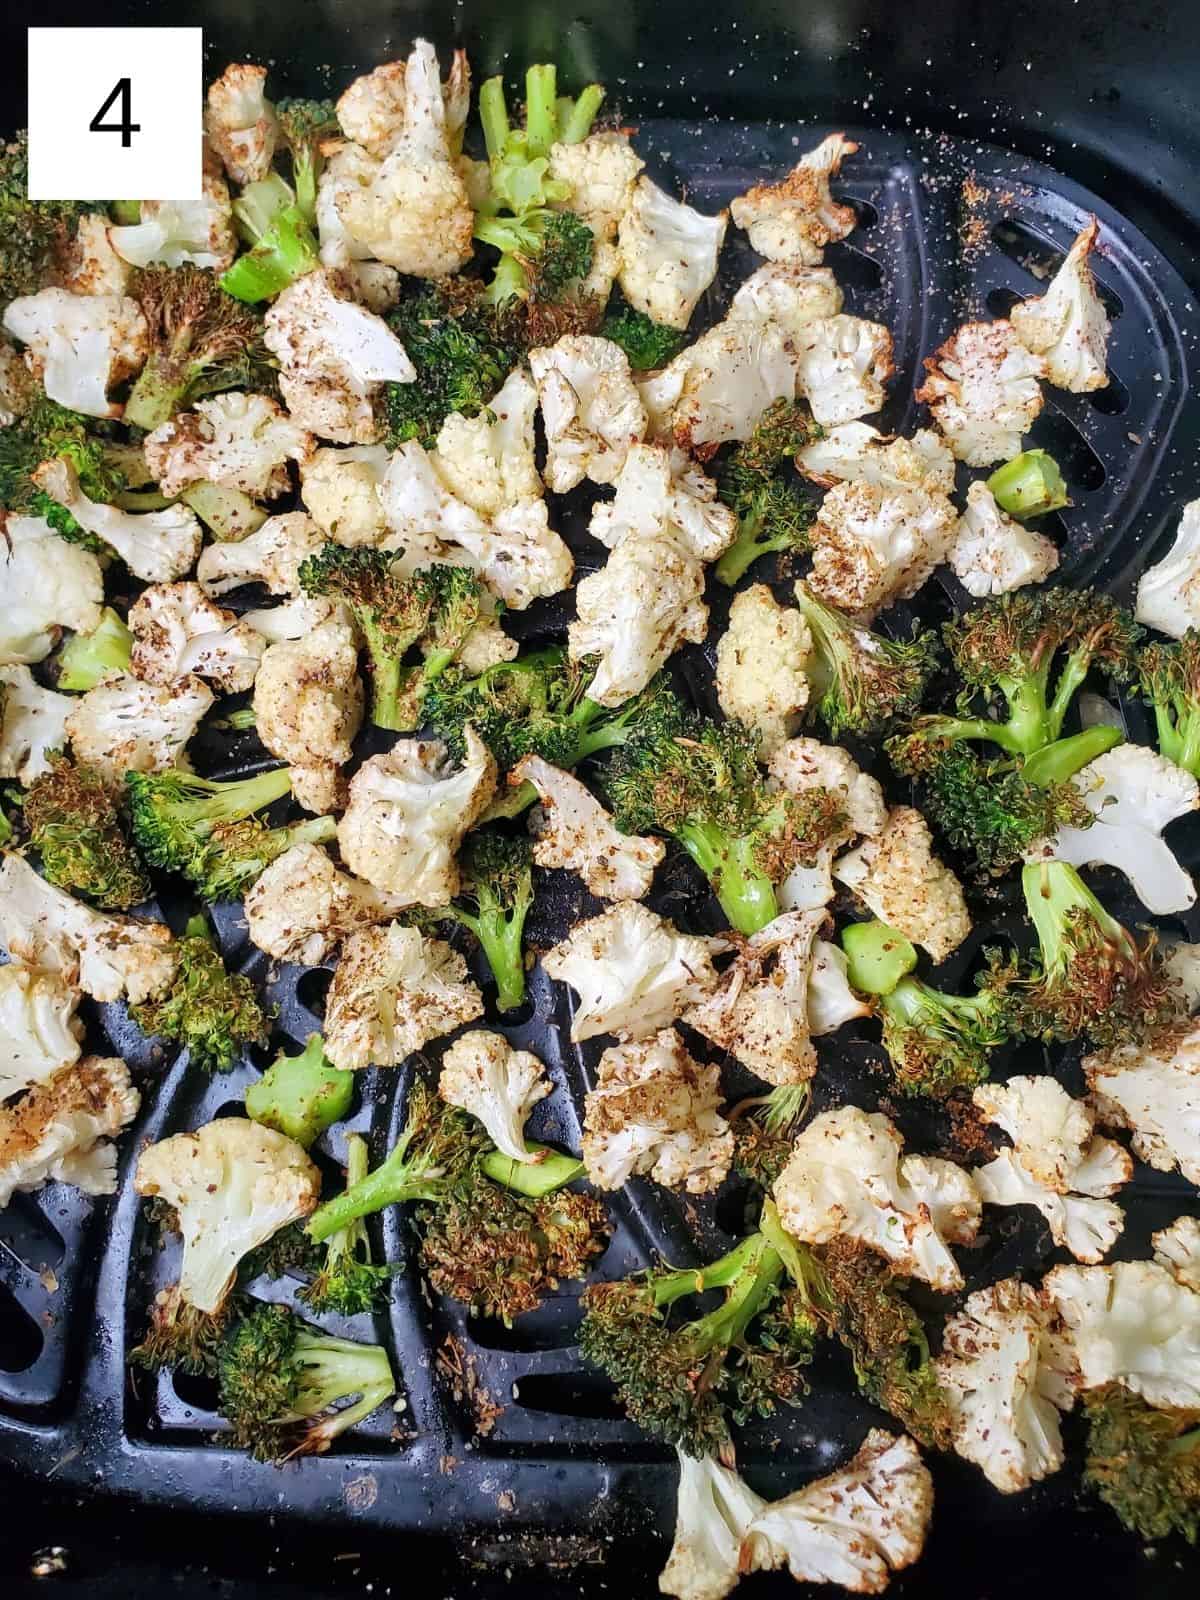 cooked seasoned broccoli and cauliflower in an air fryer.